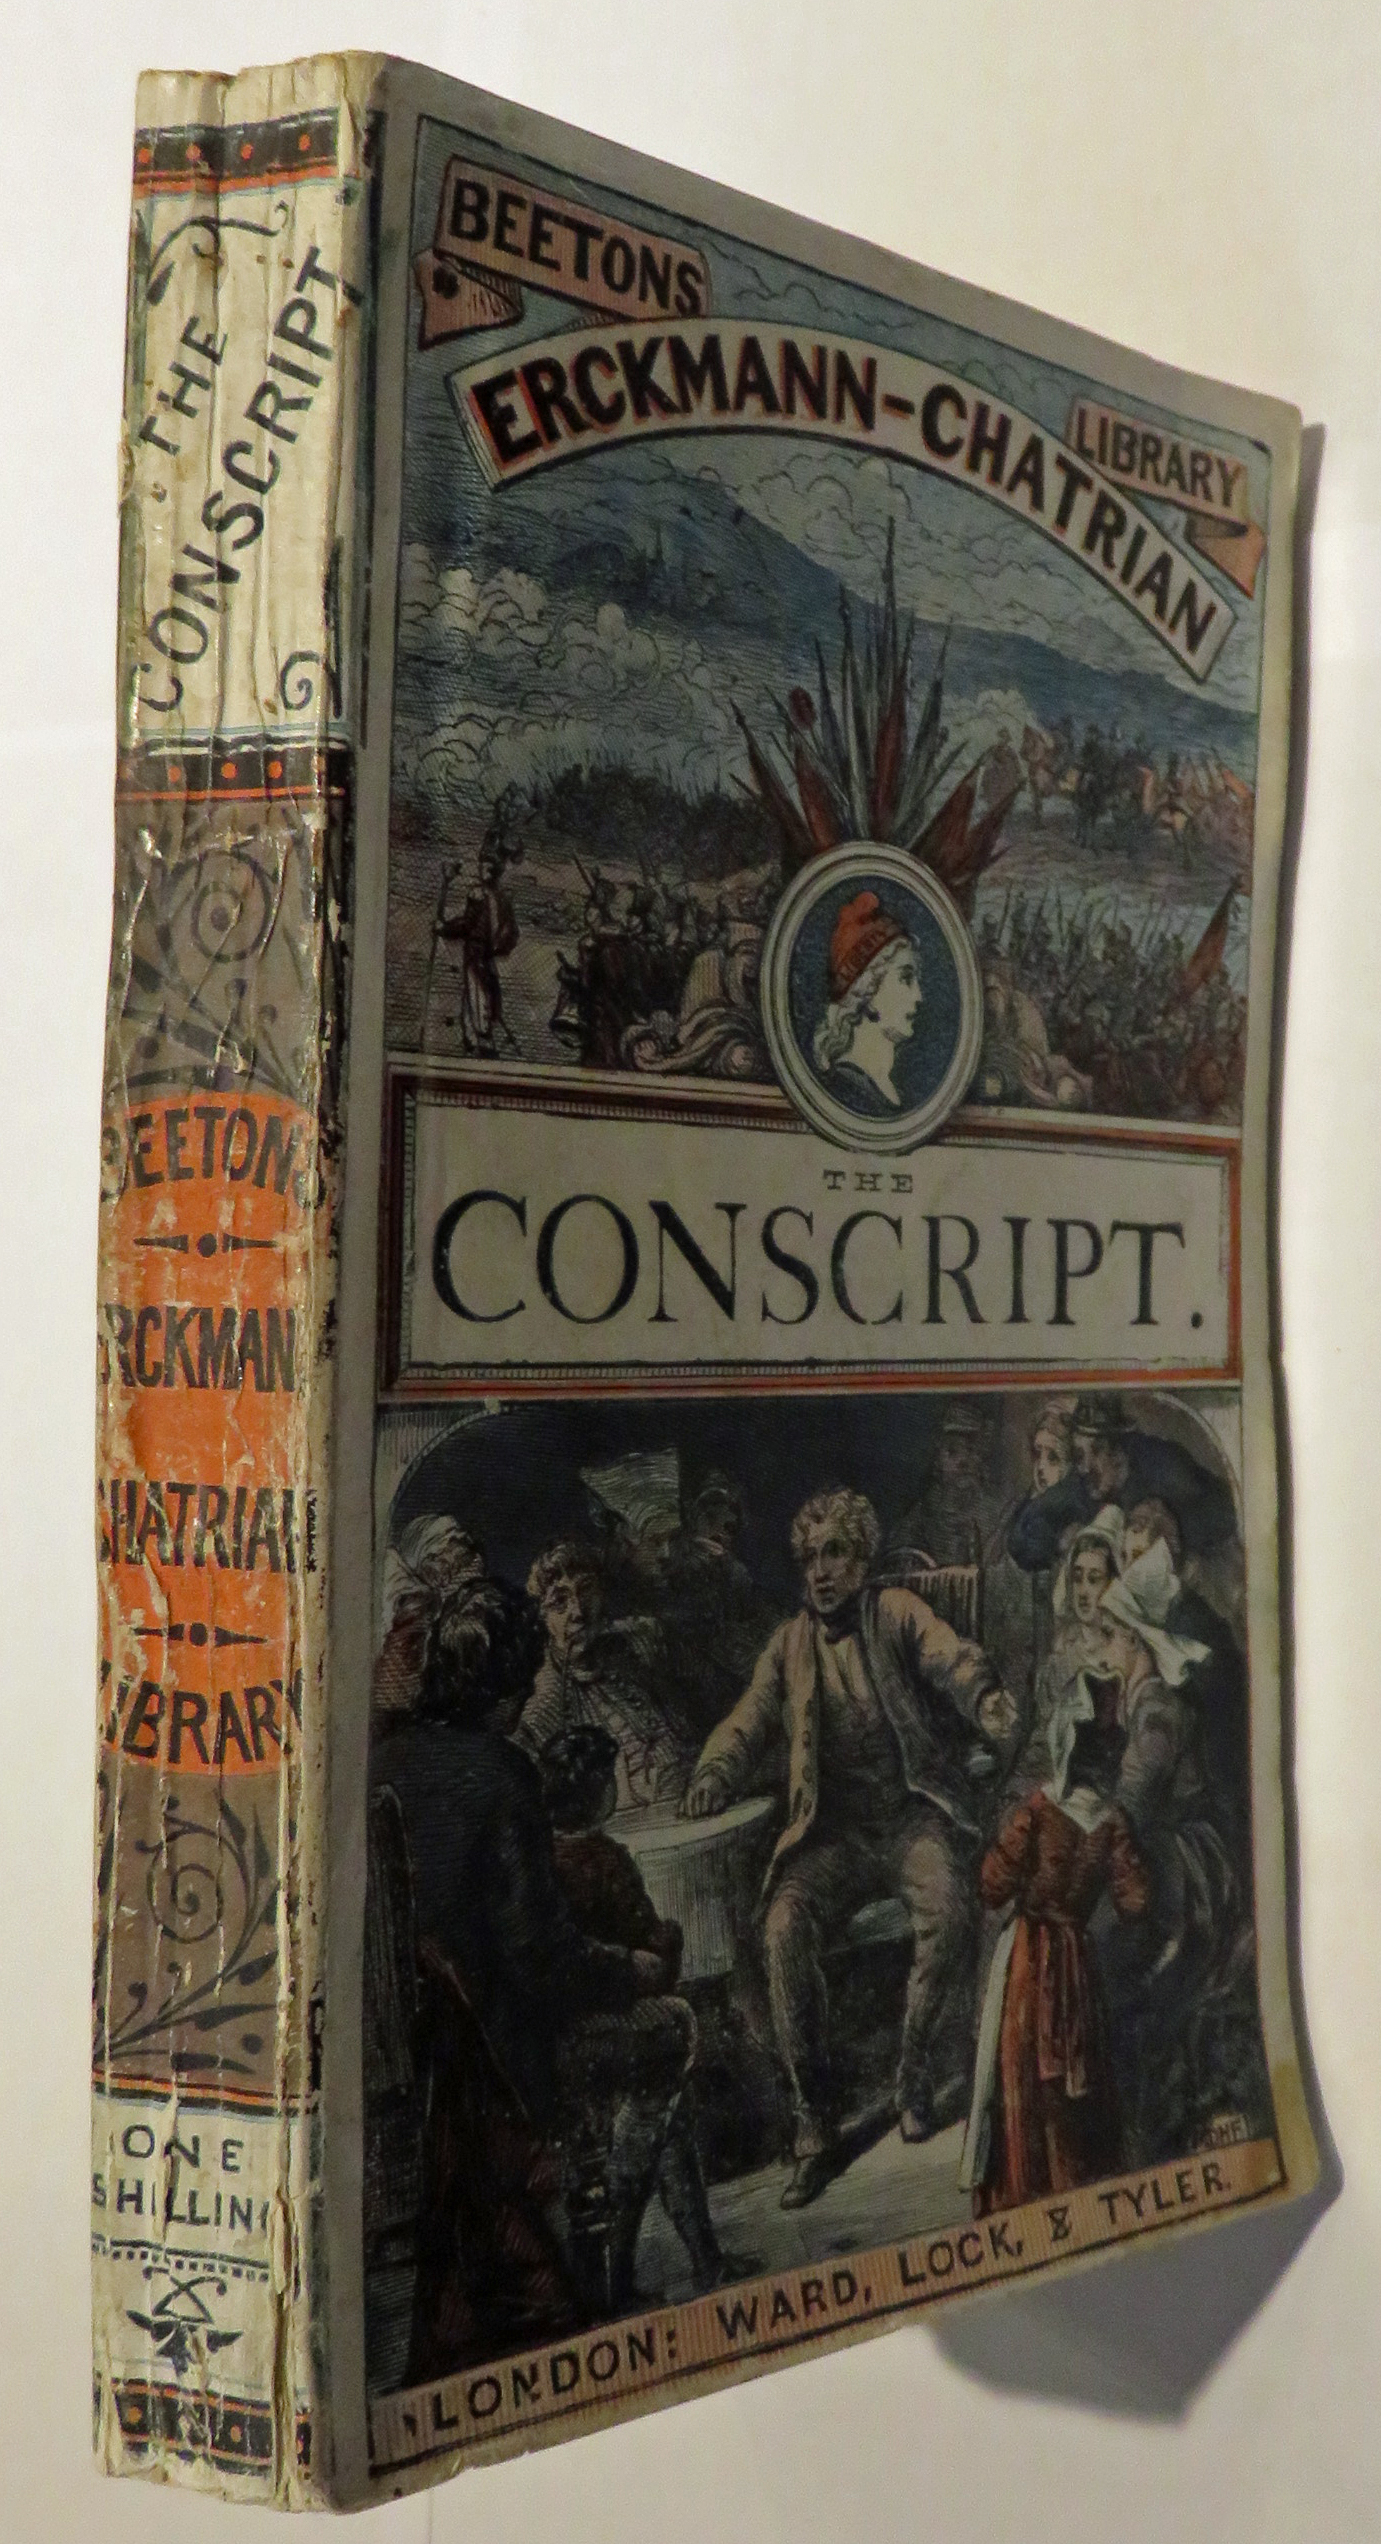 The Conscript. Beeton's Library 